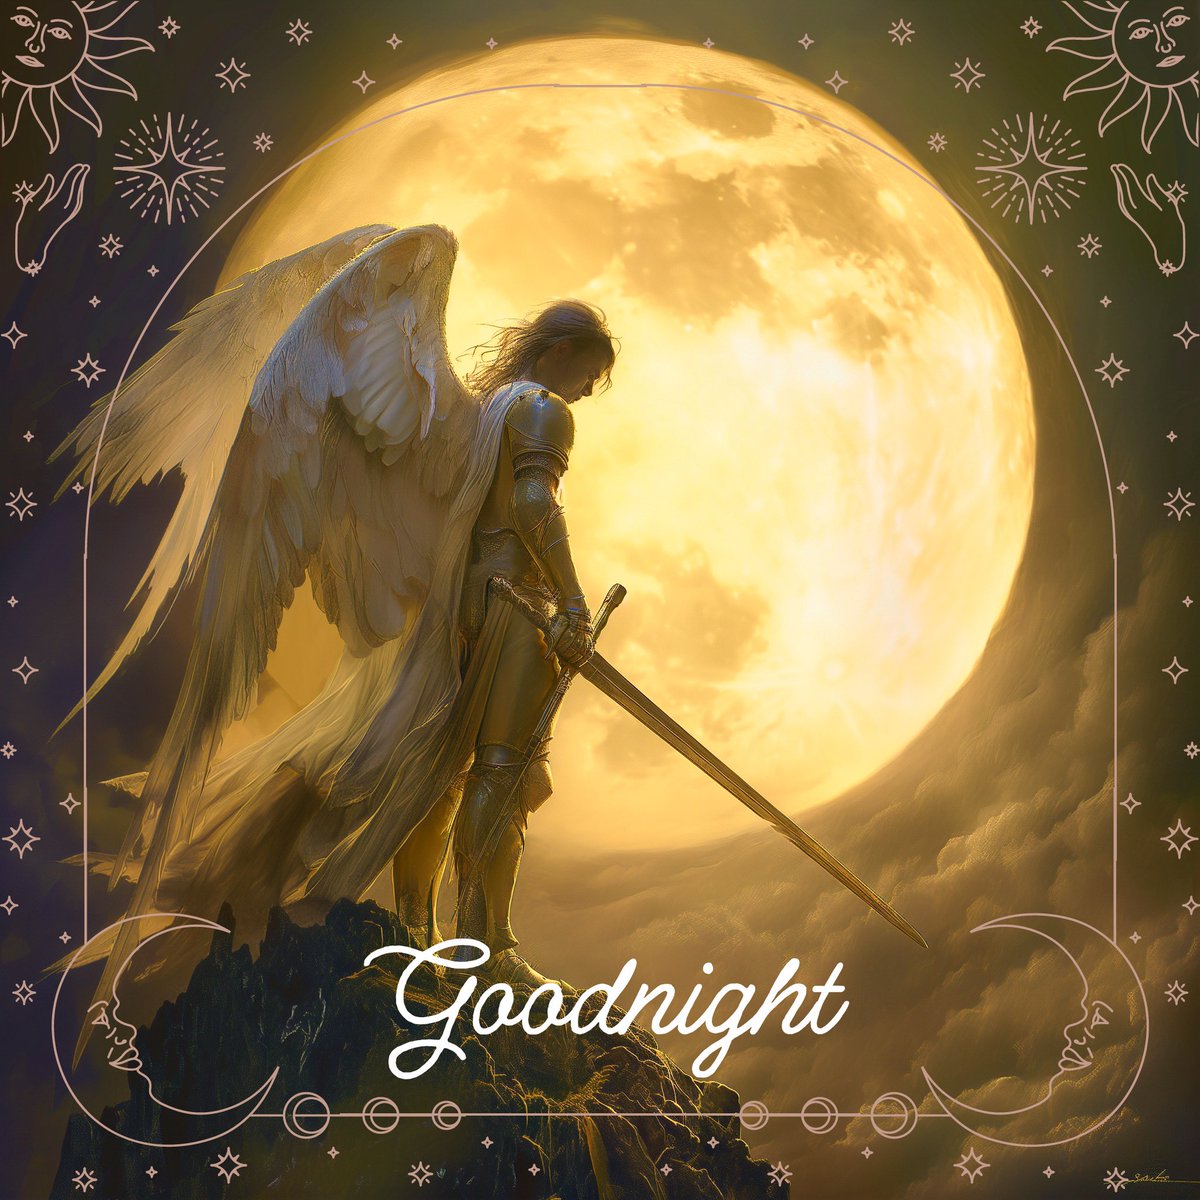 “May flights of angels speed thee to thy rest.” —William Shakespeare 

Goodnight y’all.